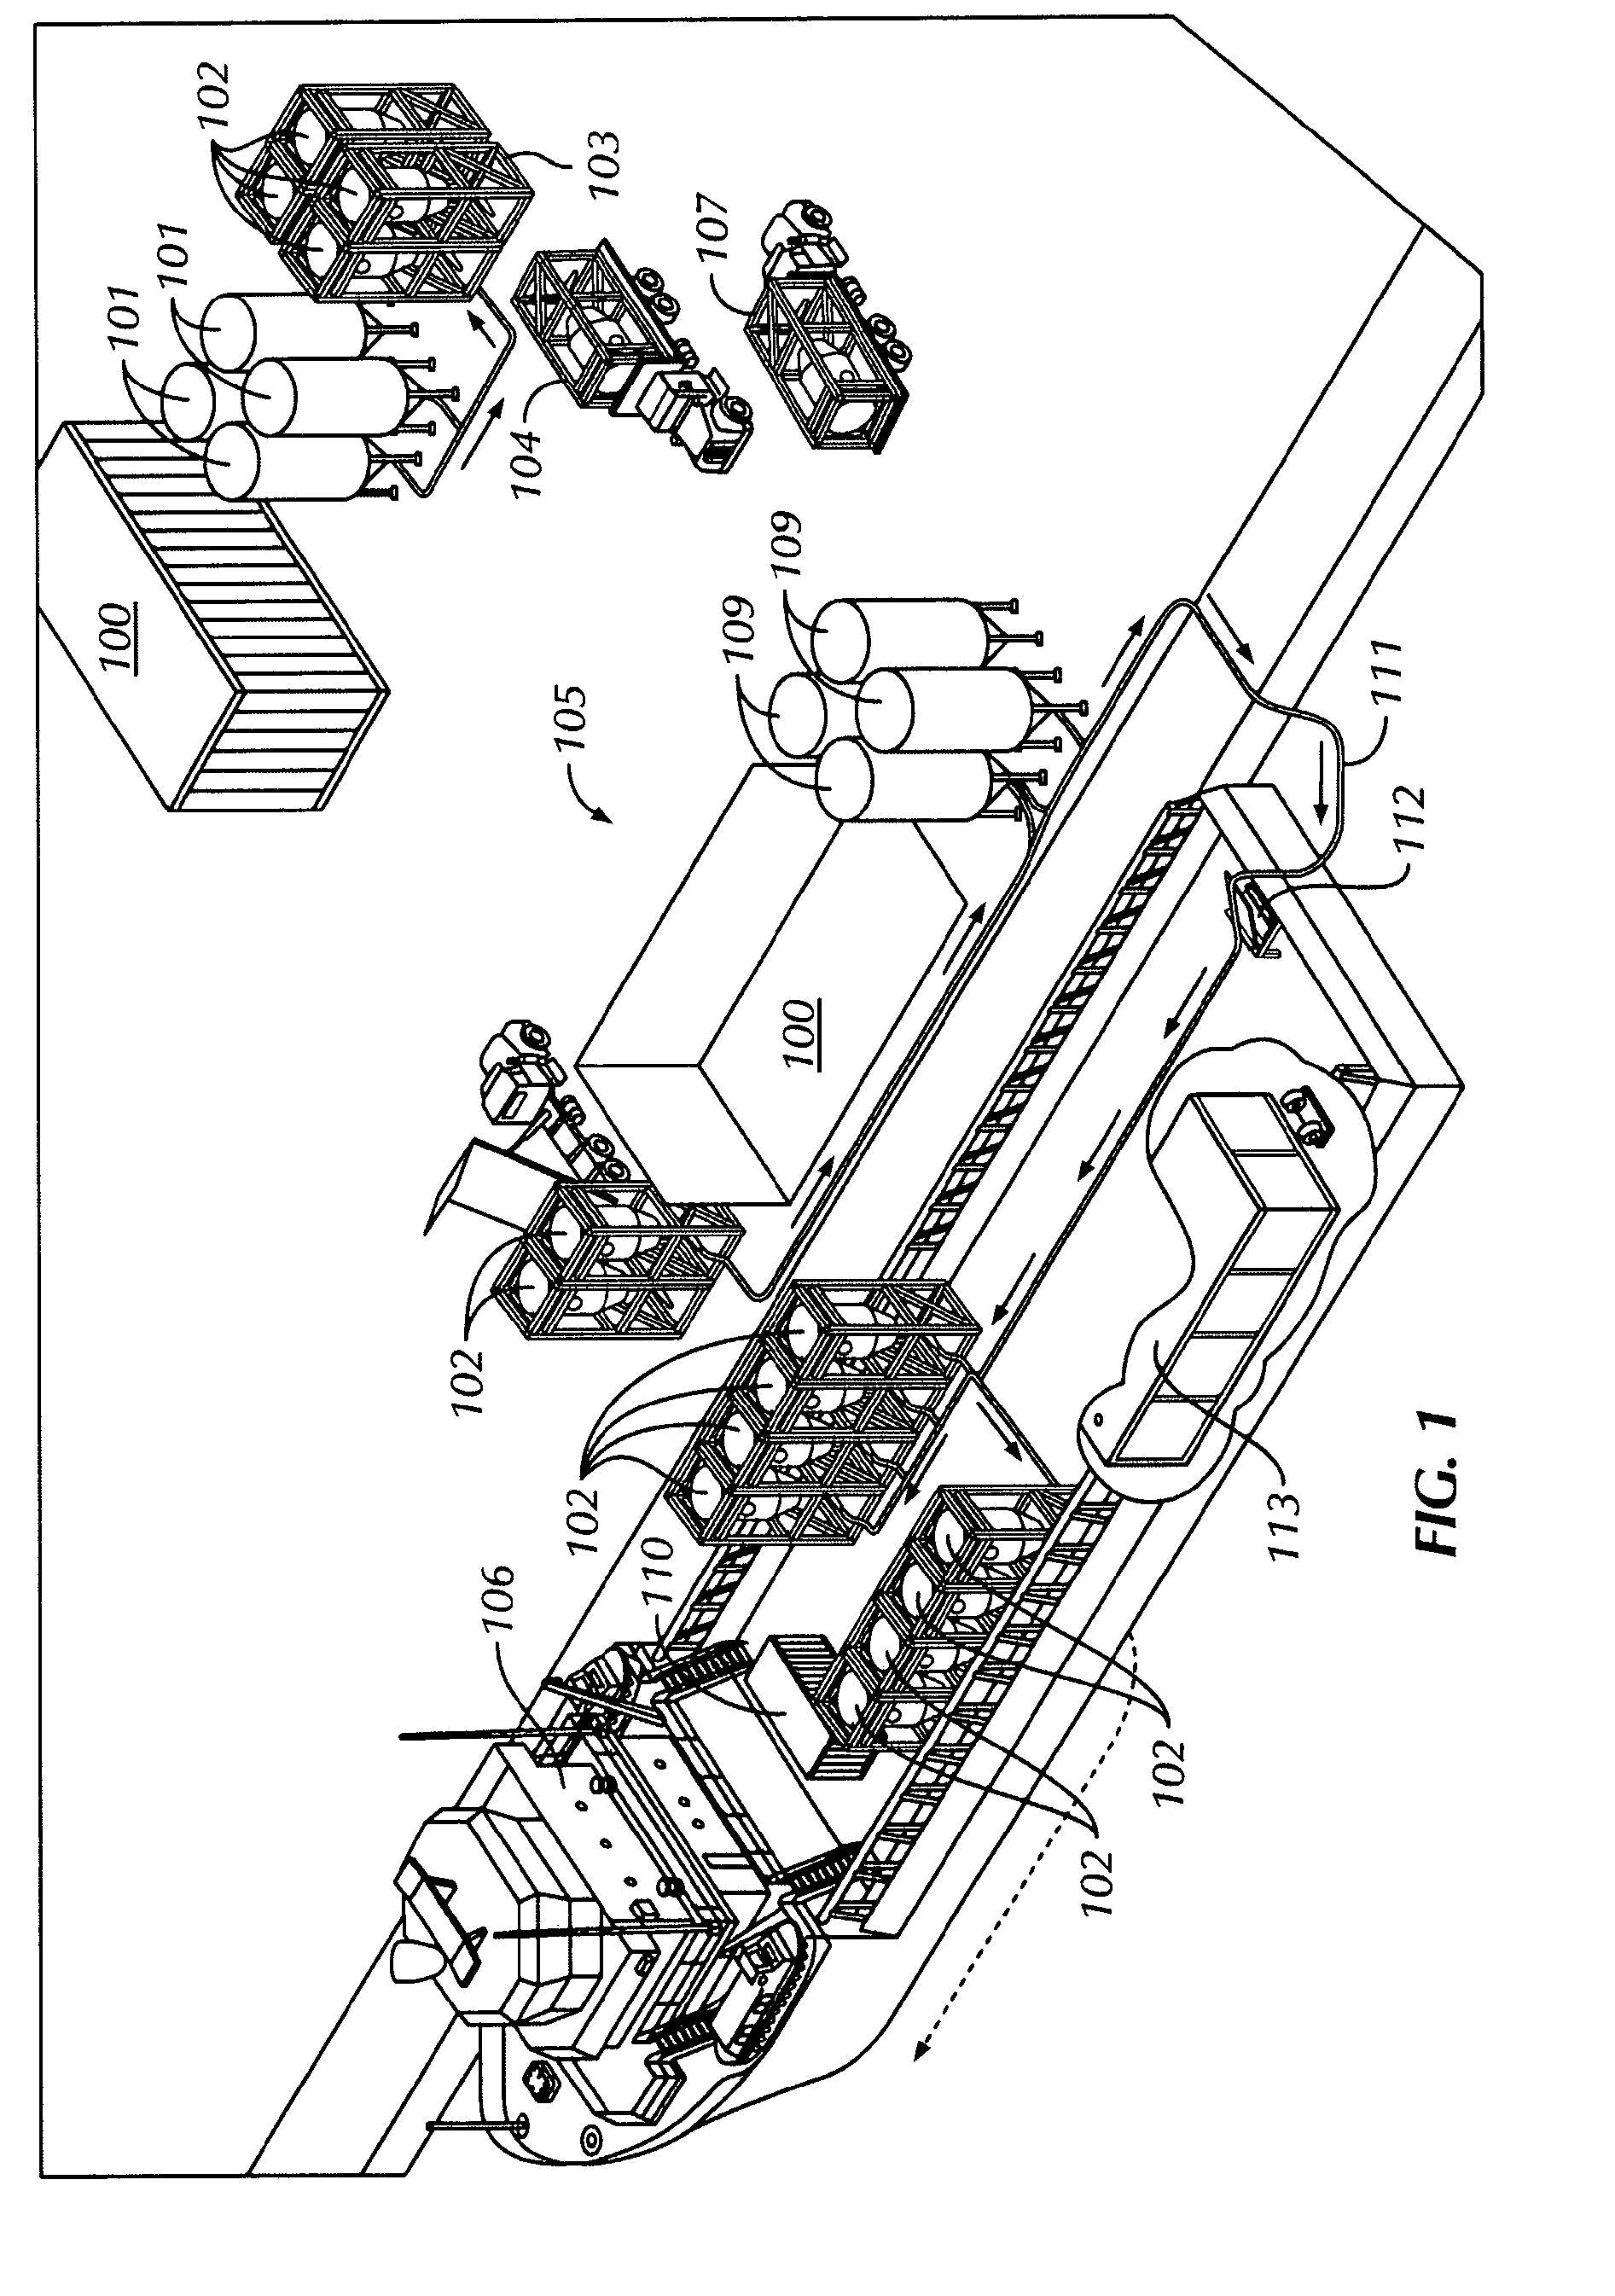 System and method for proppant transfer